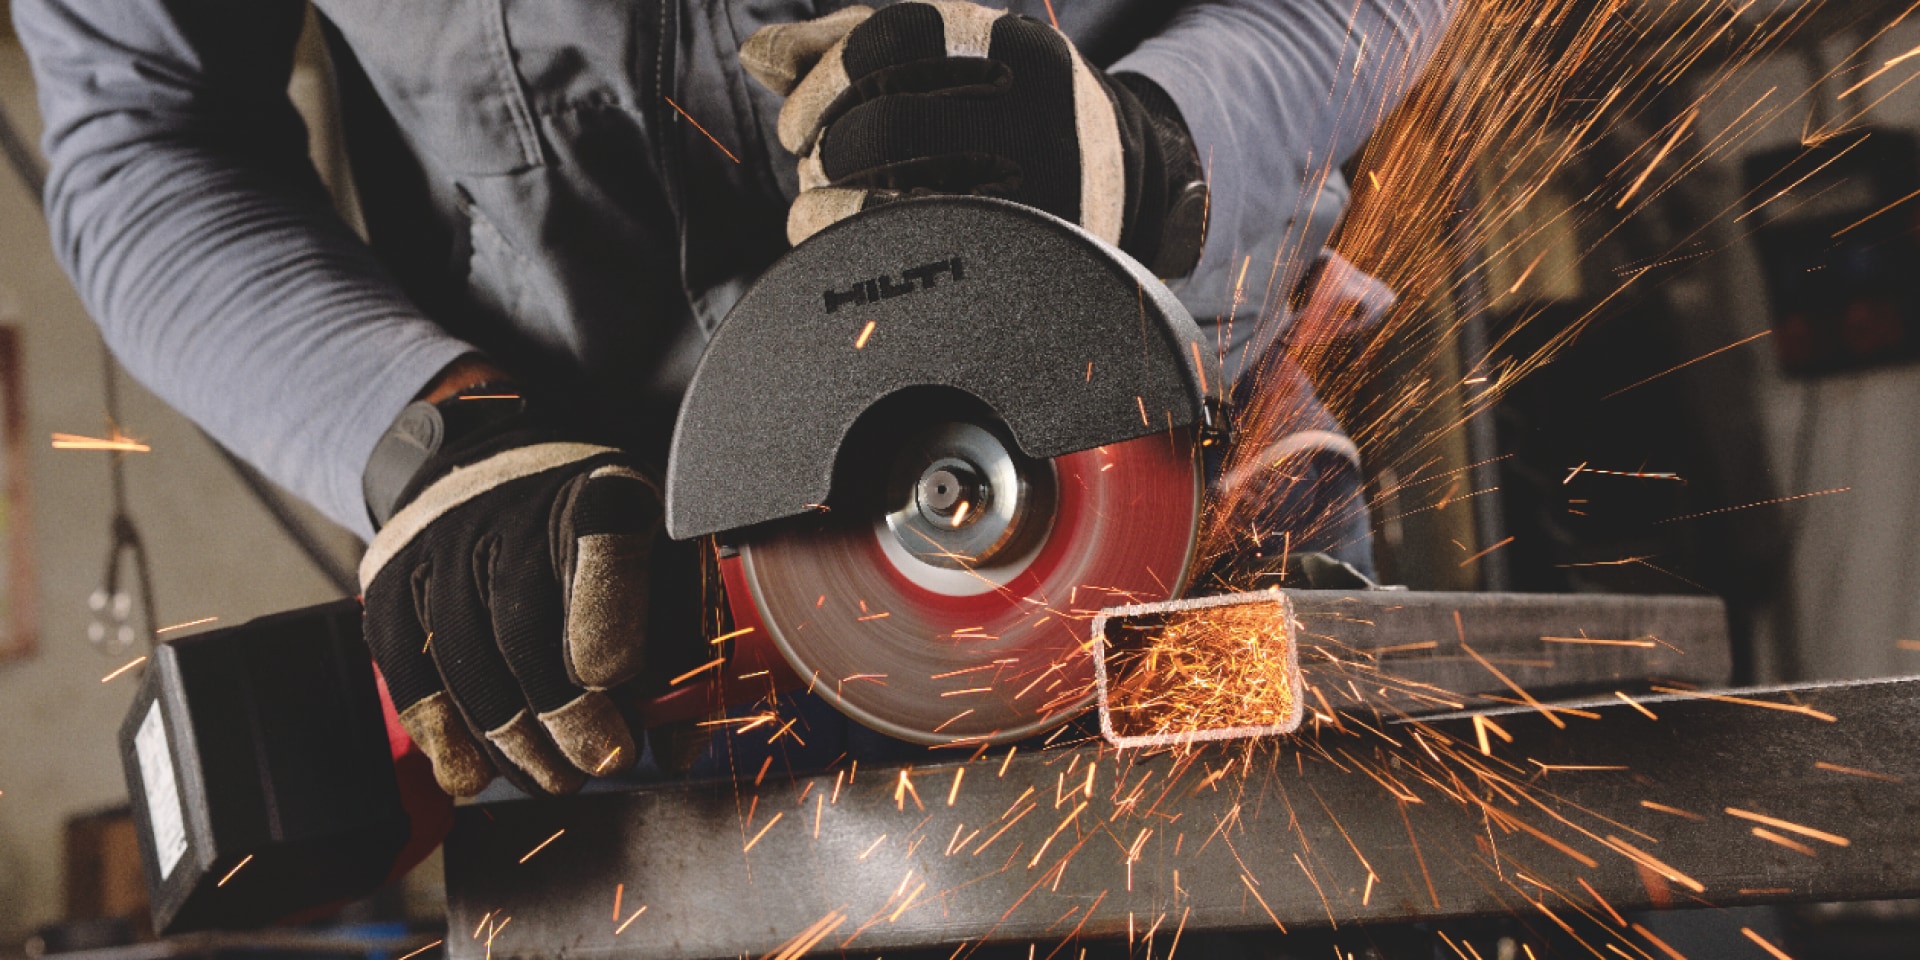 Construction worker using a AG 600-A36 Cordless angle grinder with Active Torque Control (ATC) to help prevent kickback